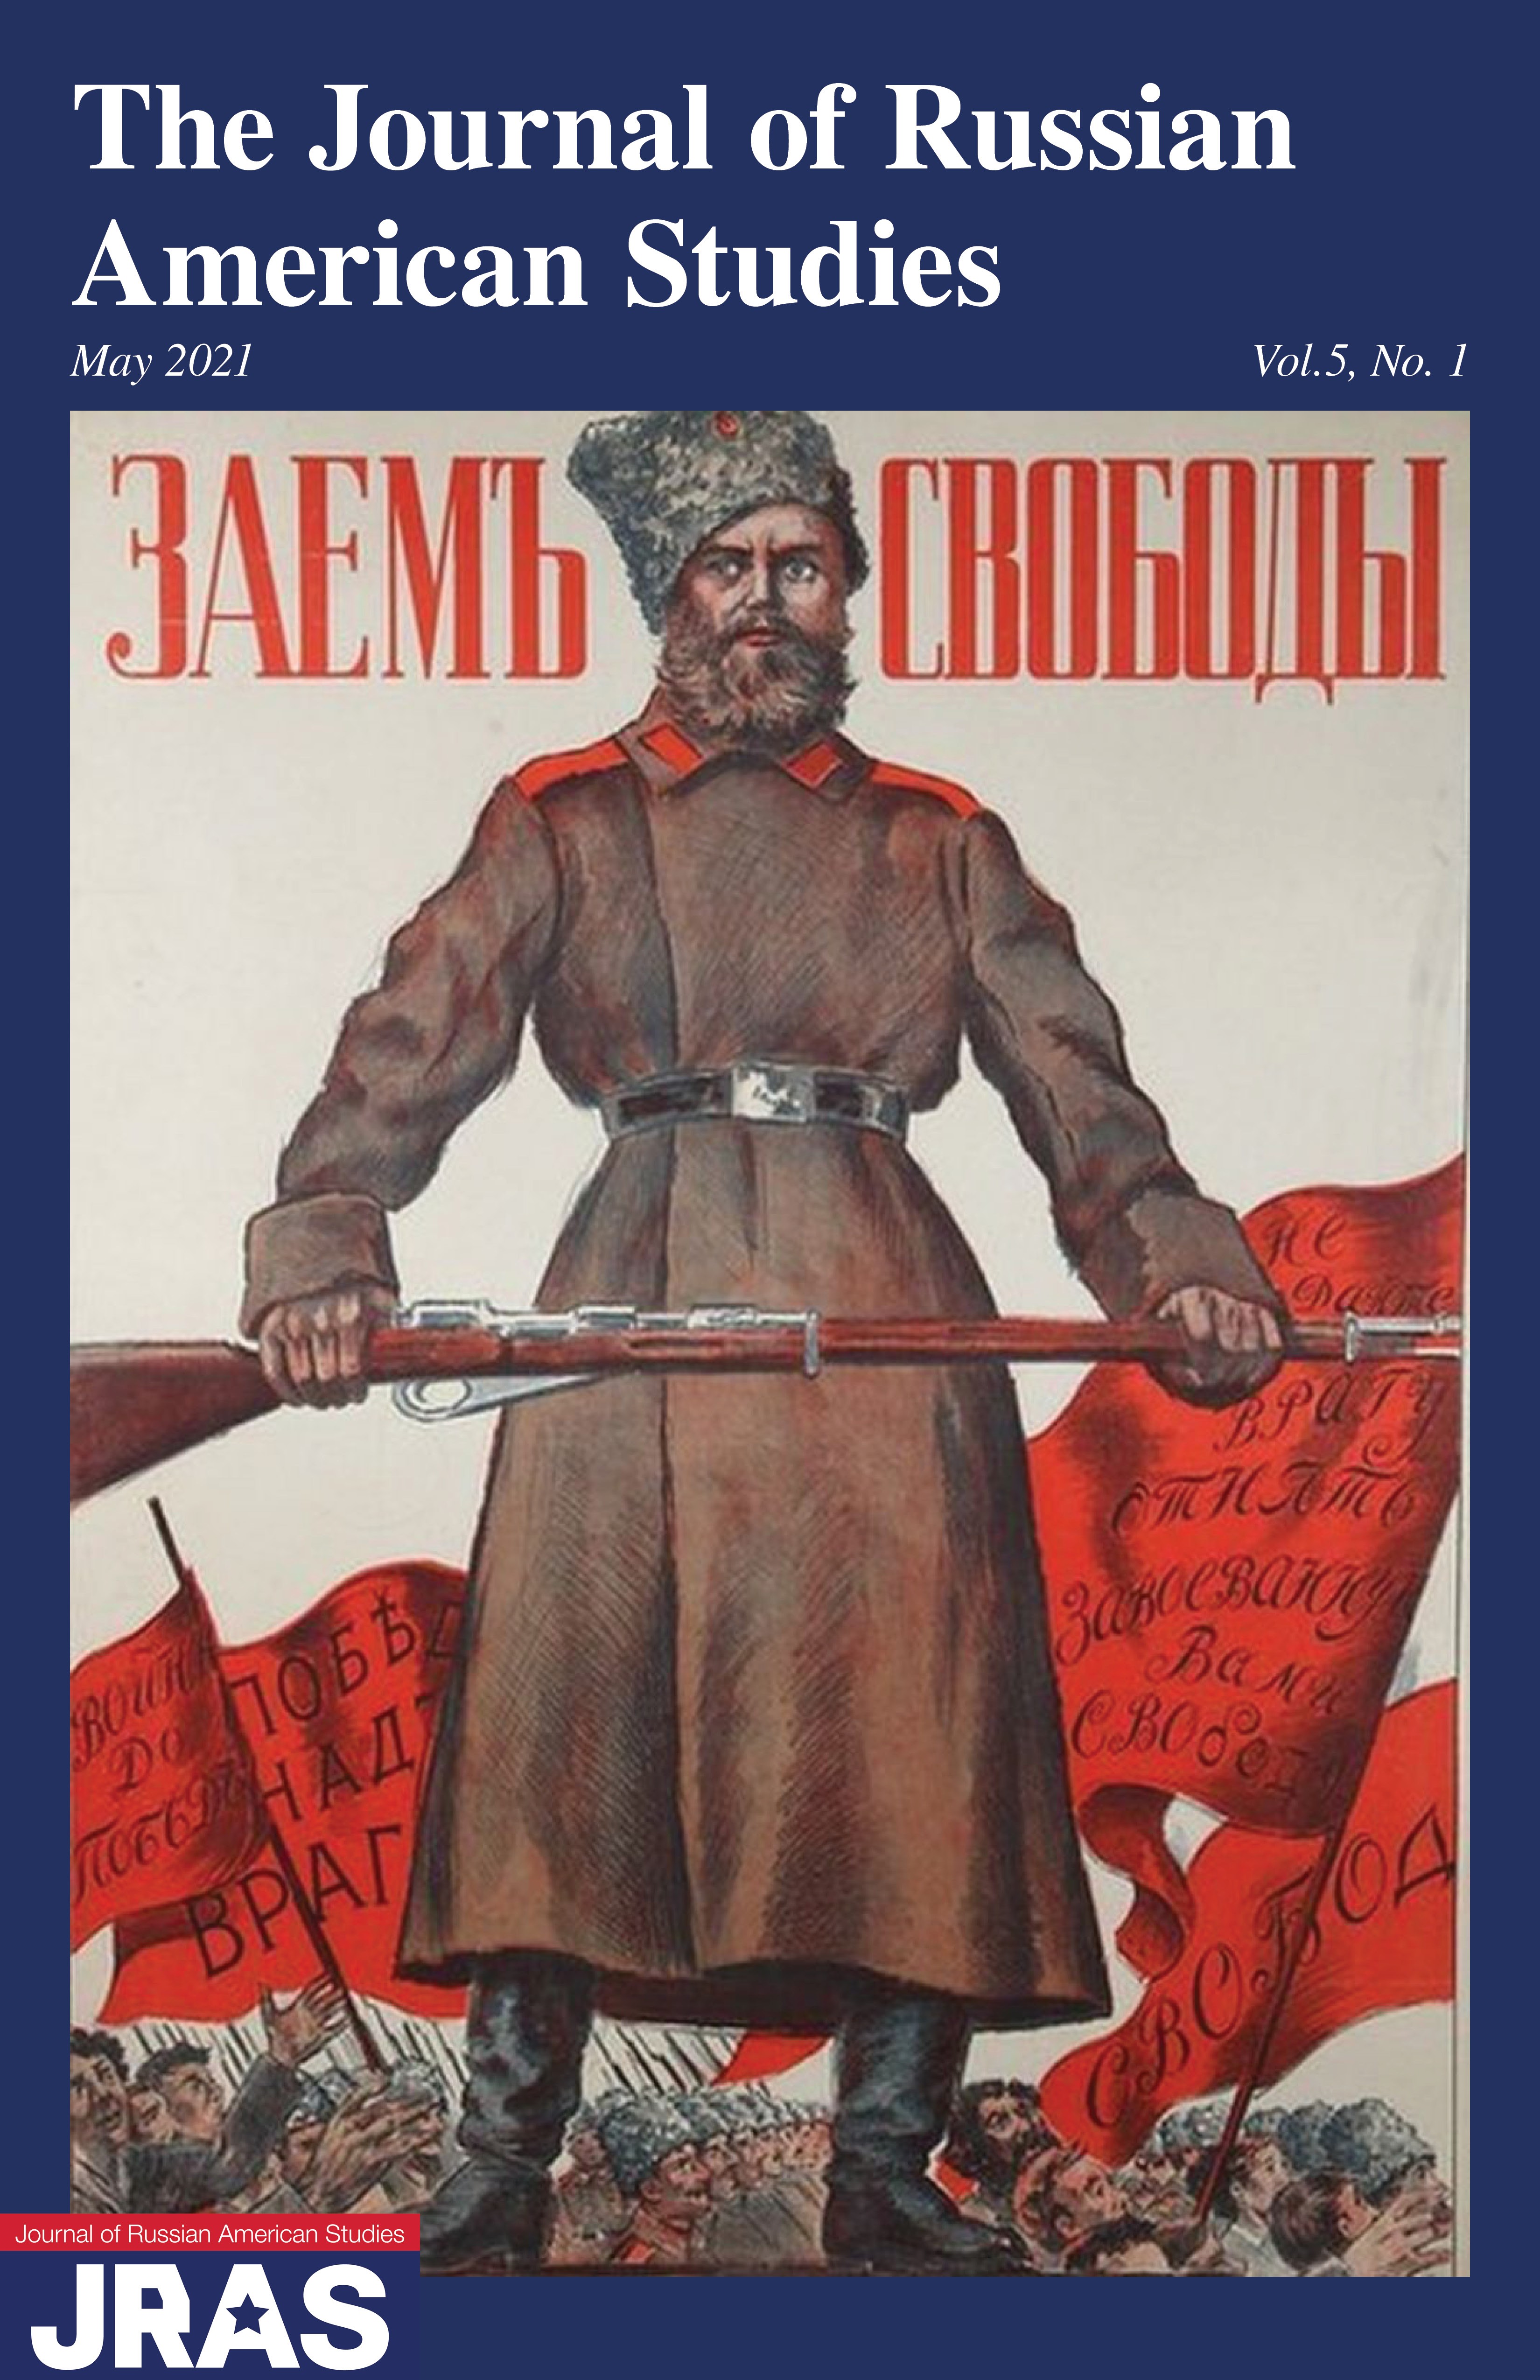 A bearded man in traditional Russian dress, holding a gun in front of a crowd with red flags